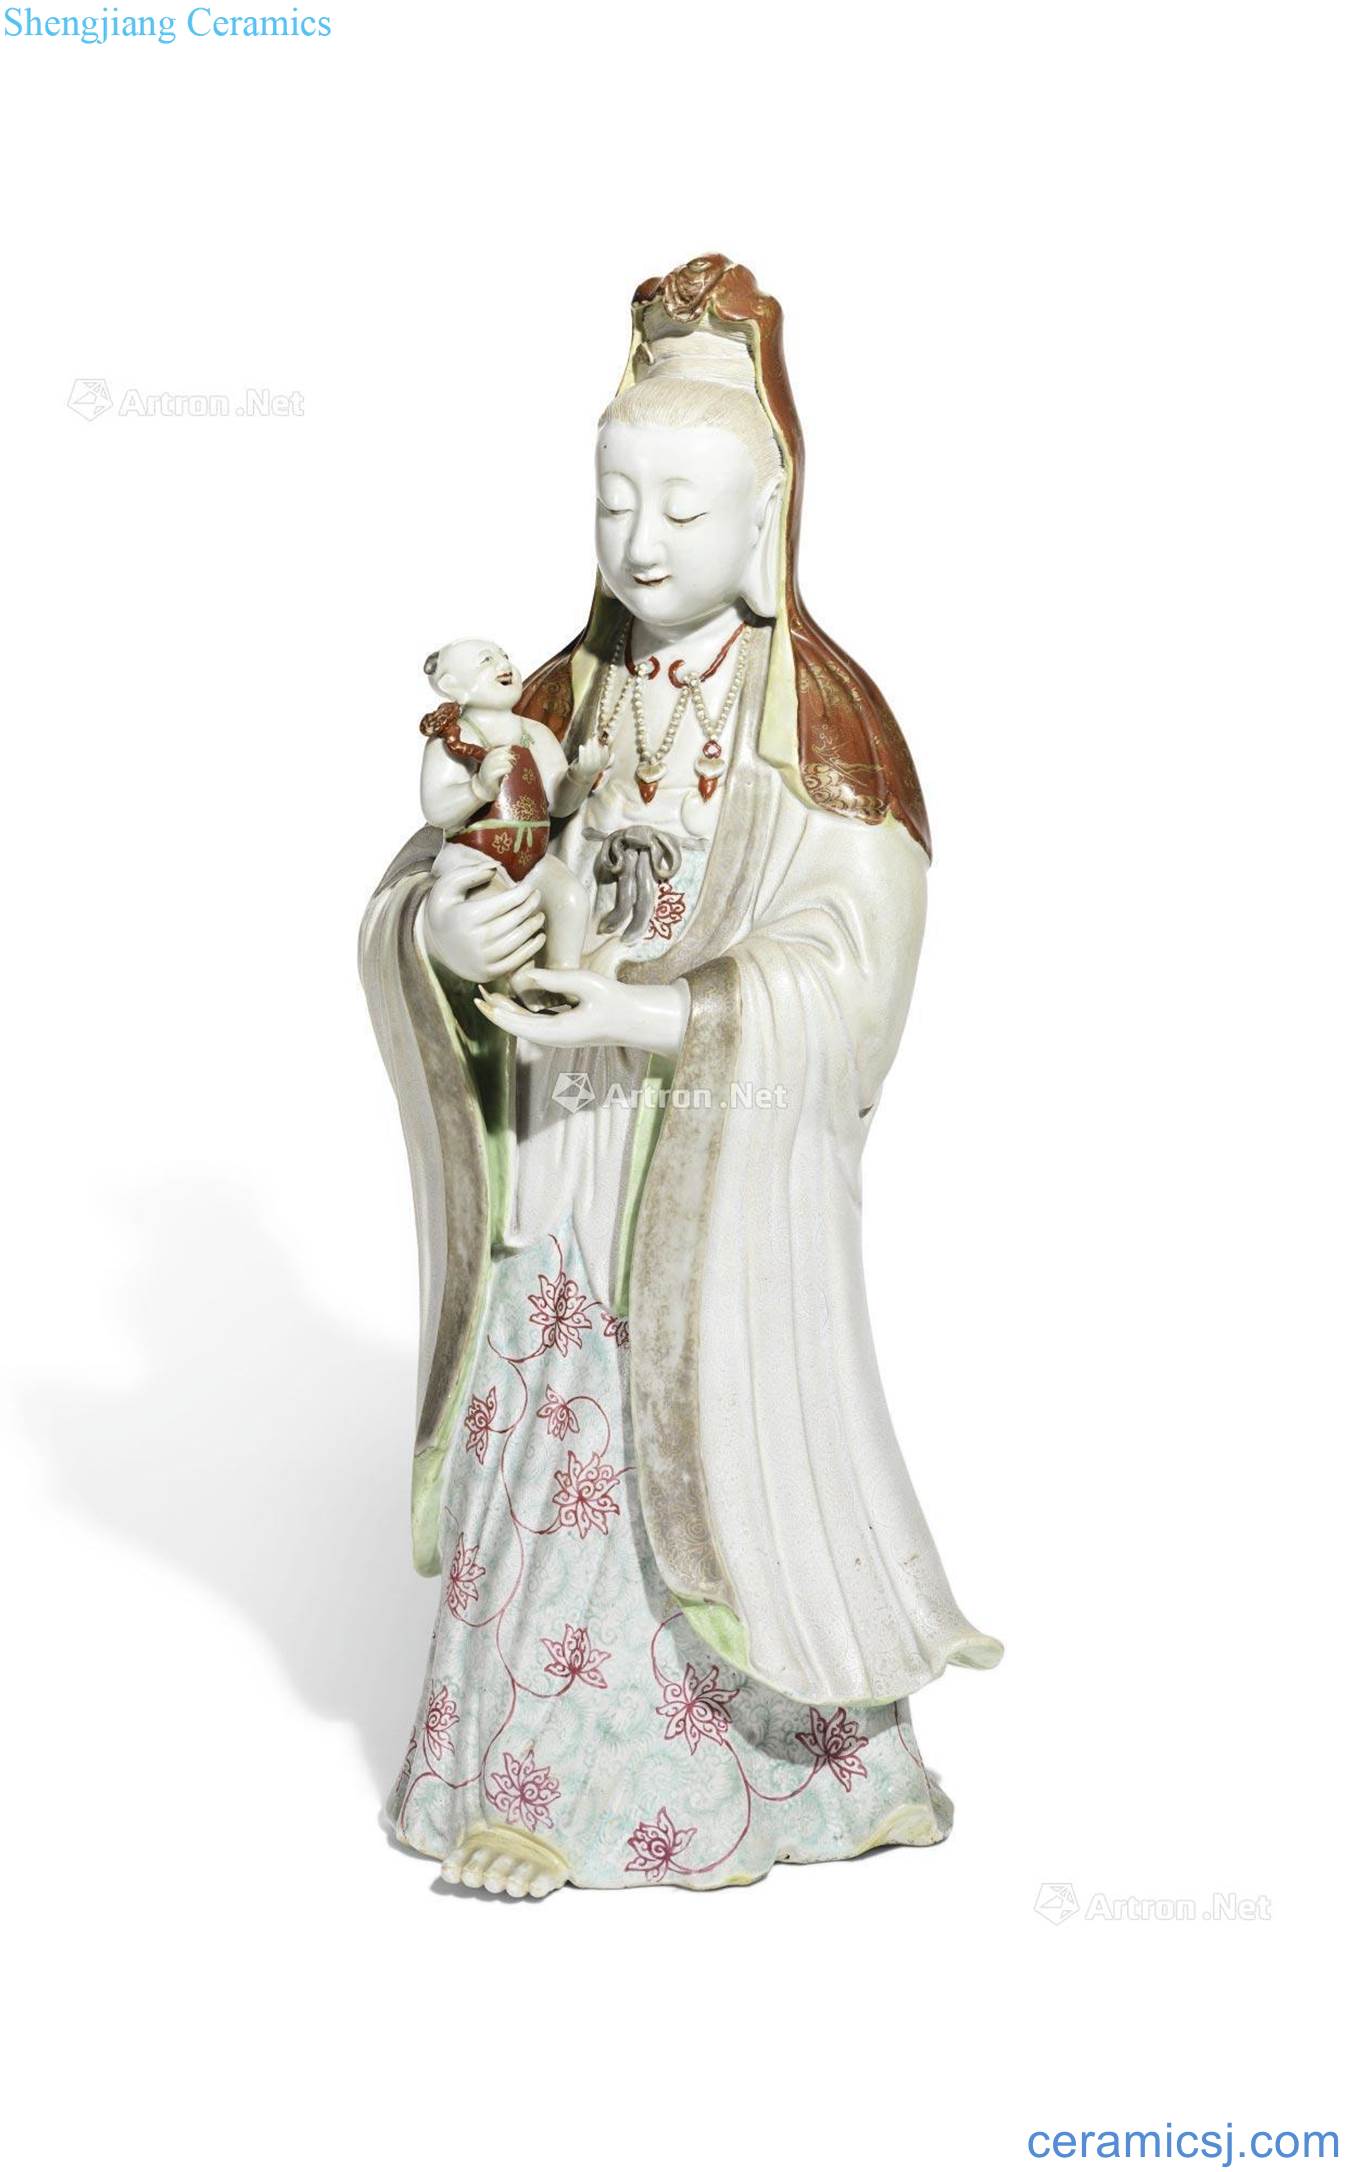 Clear/at the end of the eighteenth century in the early nineteenth century Pastel SongZi guanyin stands resemble